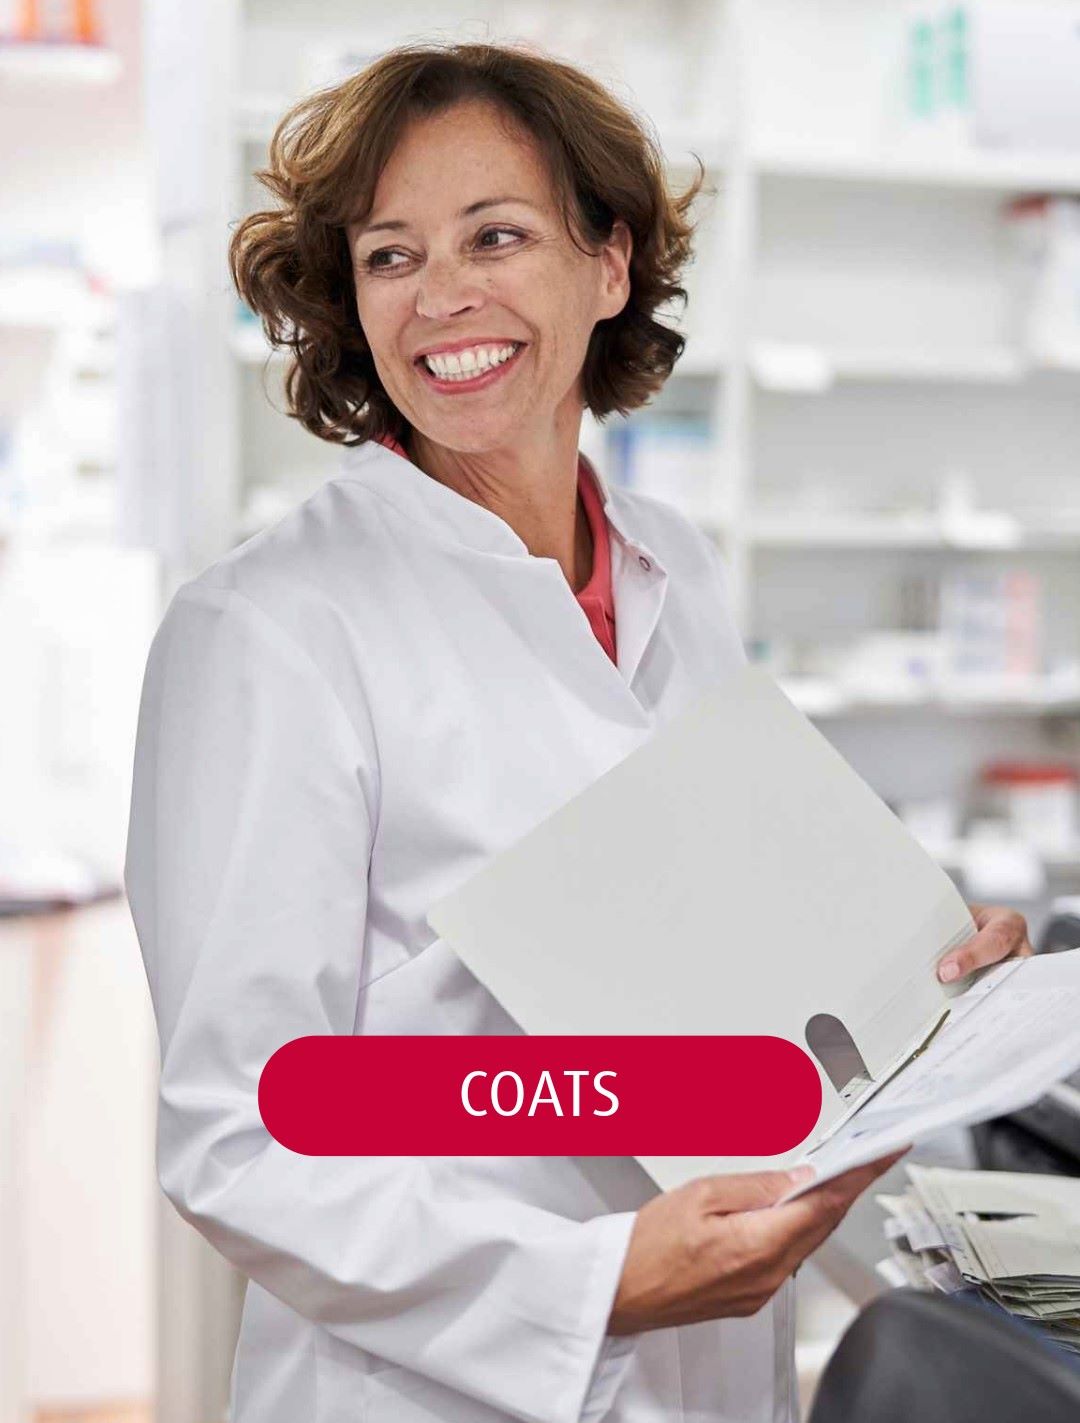 A pharmacist wearing a BP lab coat and holding a folder in her hand